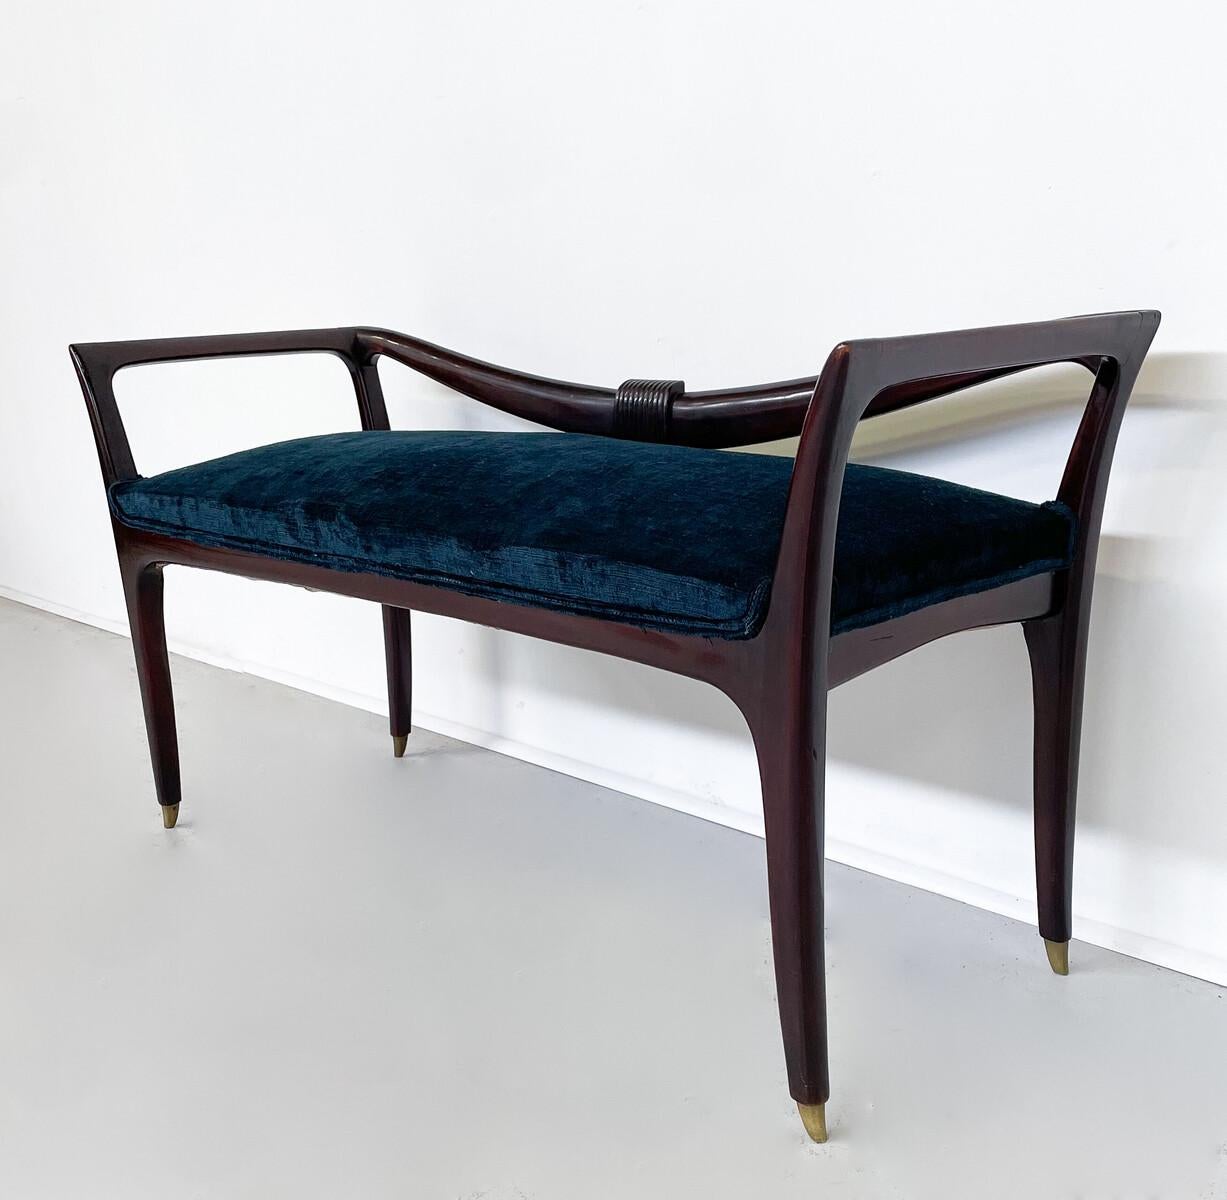 Fabric Mid-Century Modern Bench by Emilio Lancia, Italy, 1930s For Sale